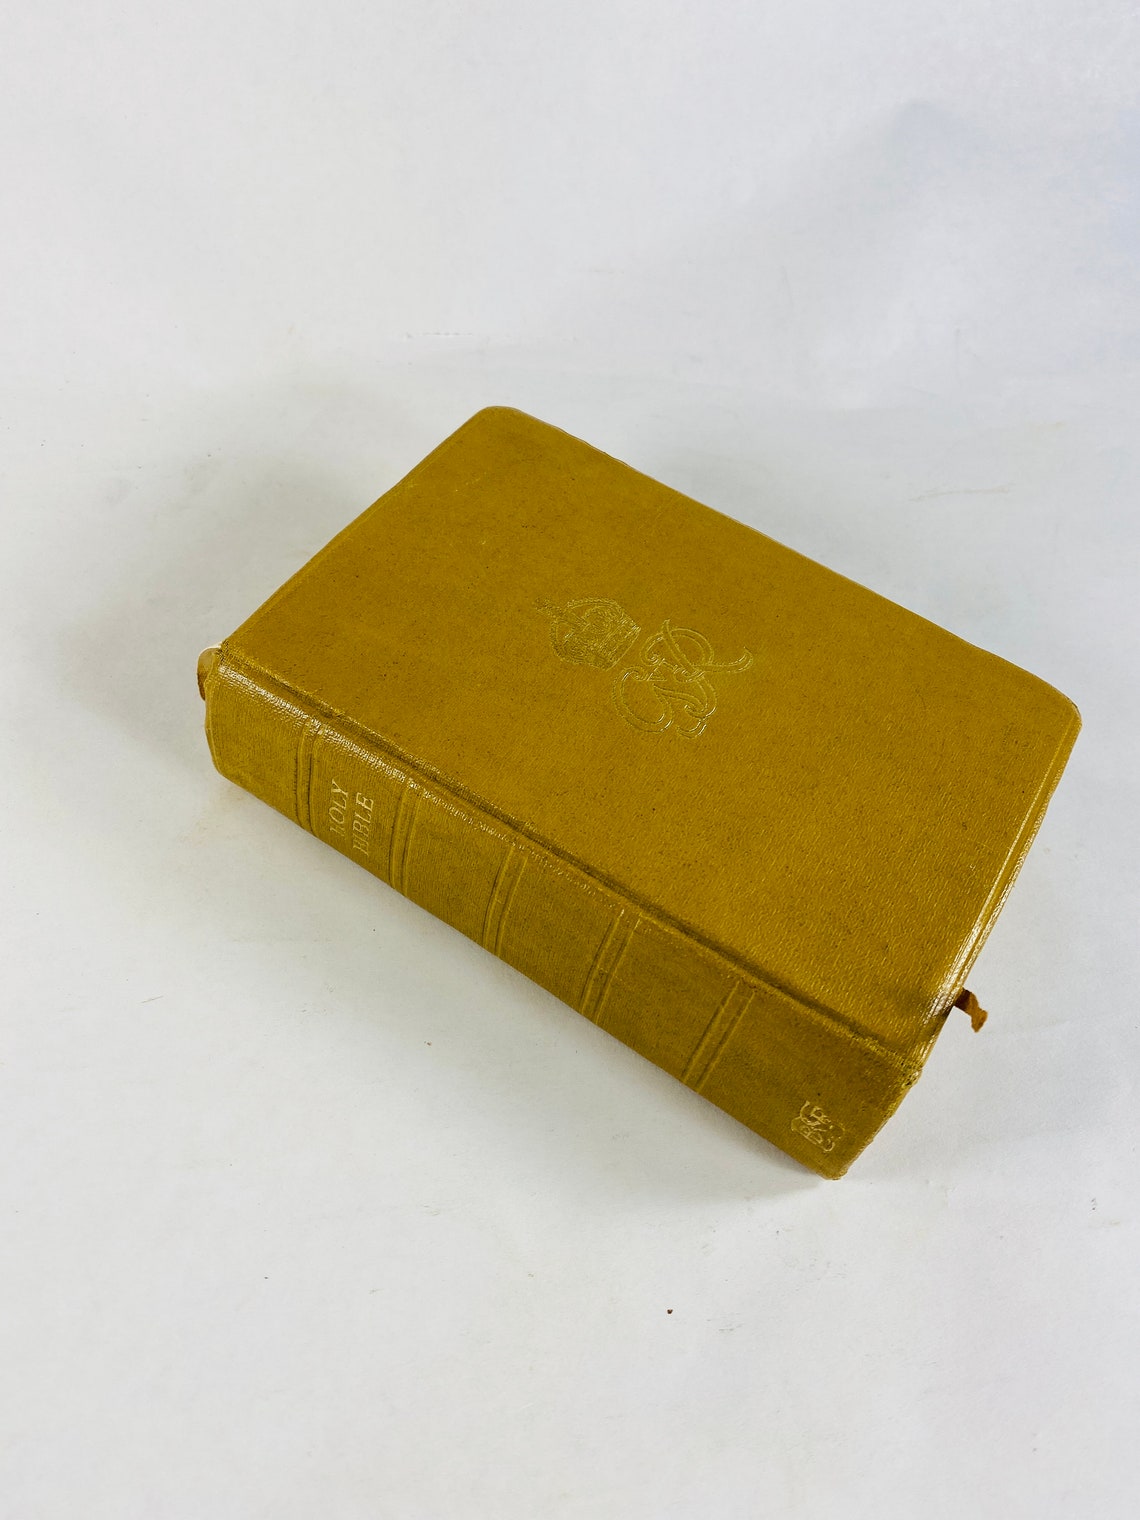 1939 Holy Bible worn leather and stamped gilt British